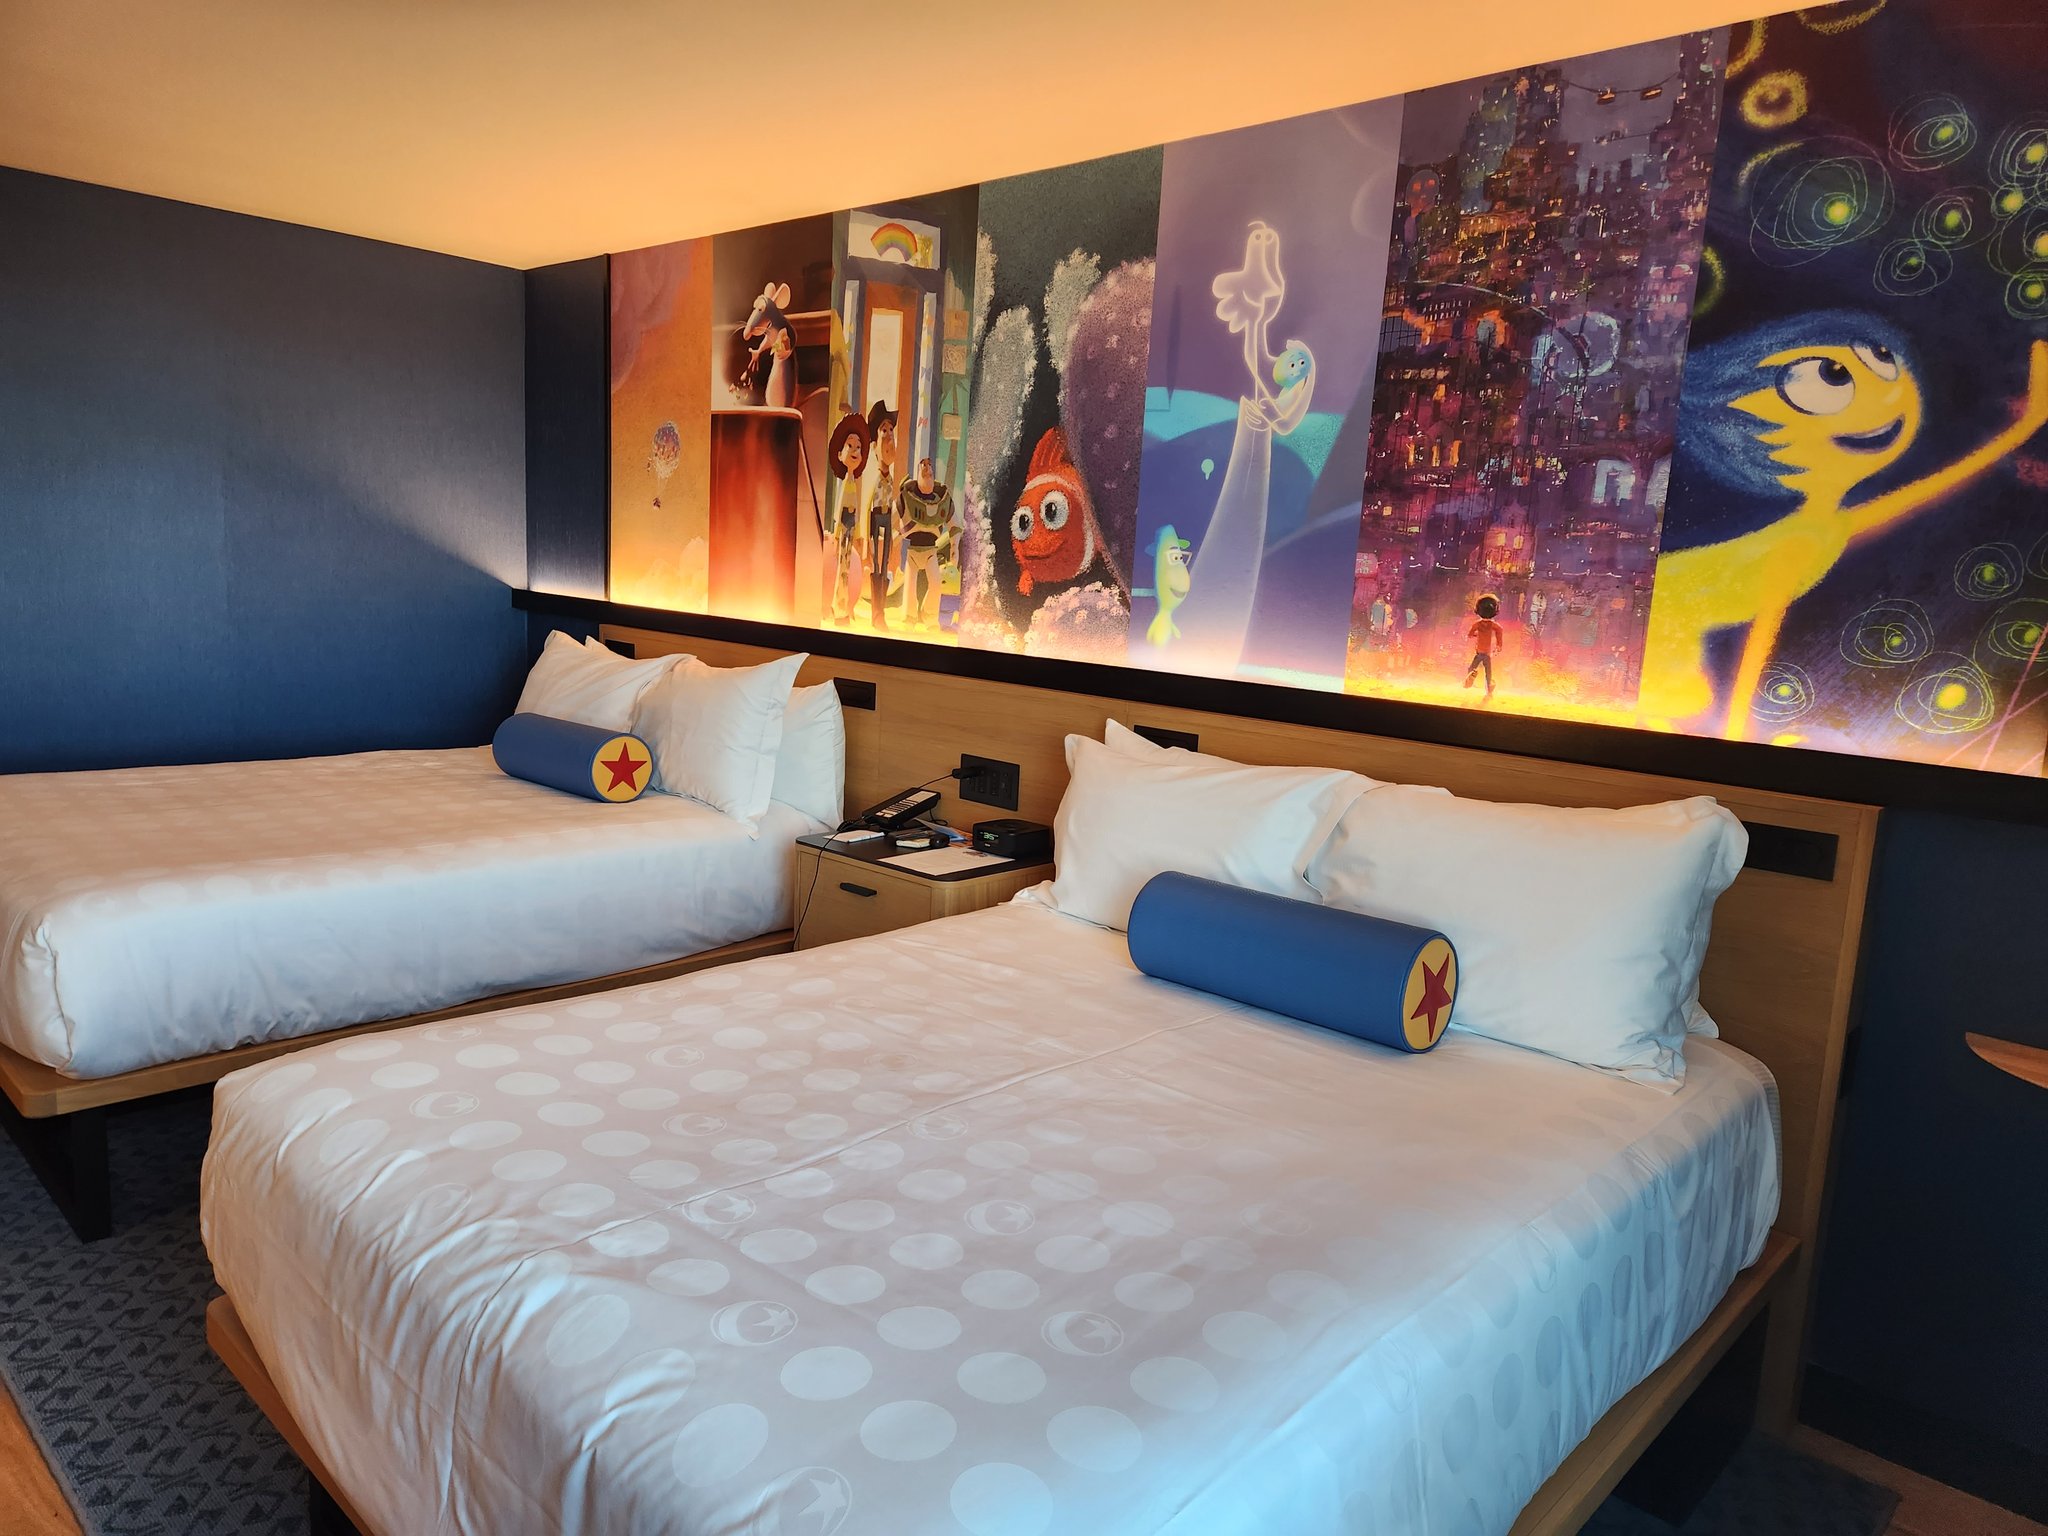 Guest beds at Pixar Place Hotel